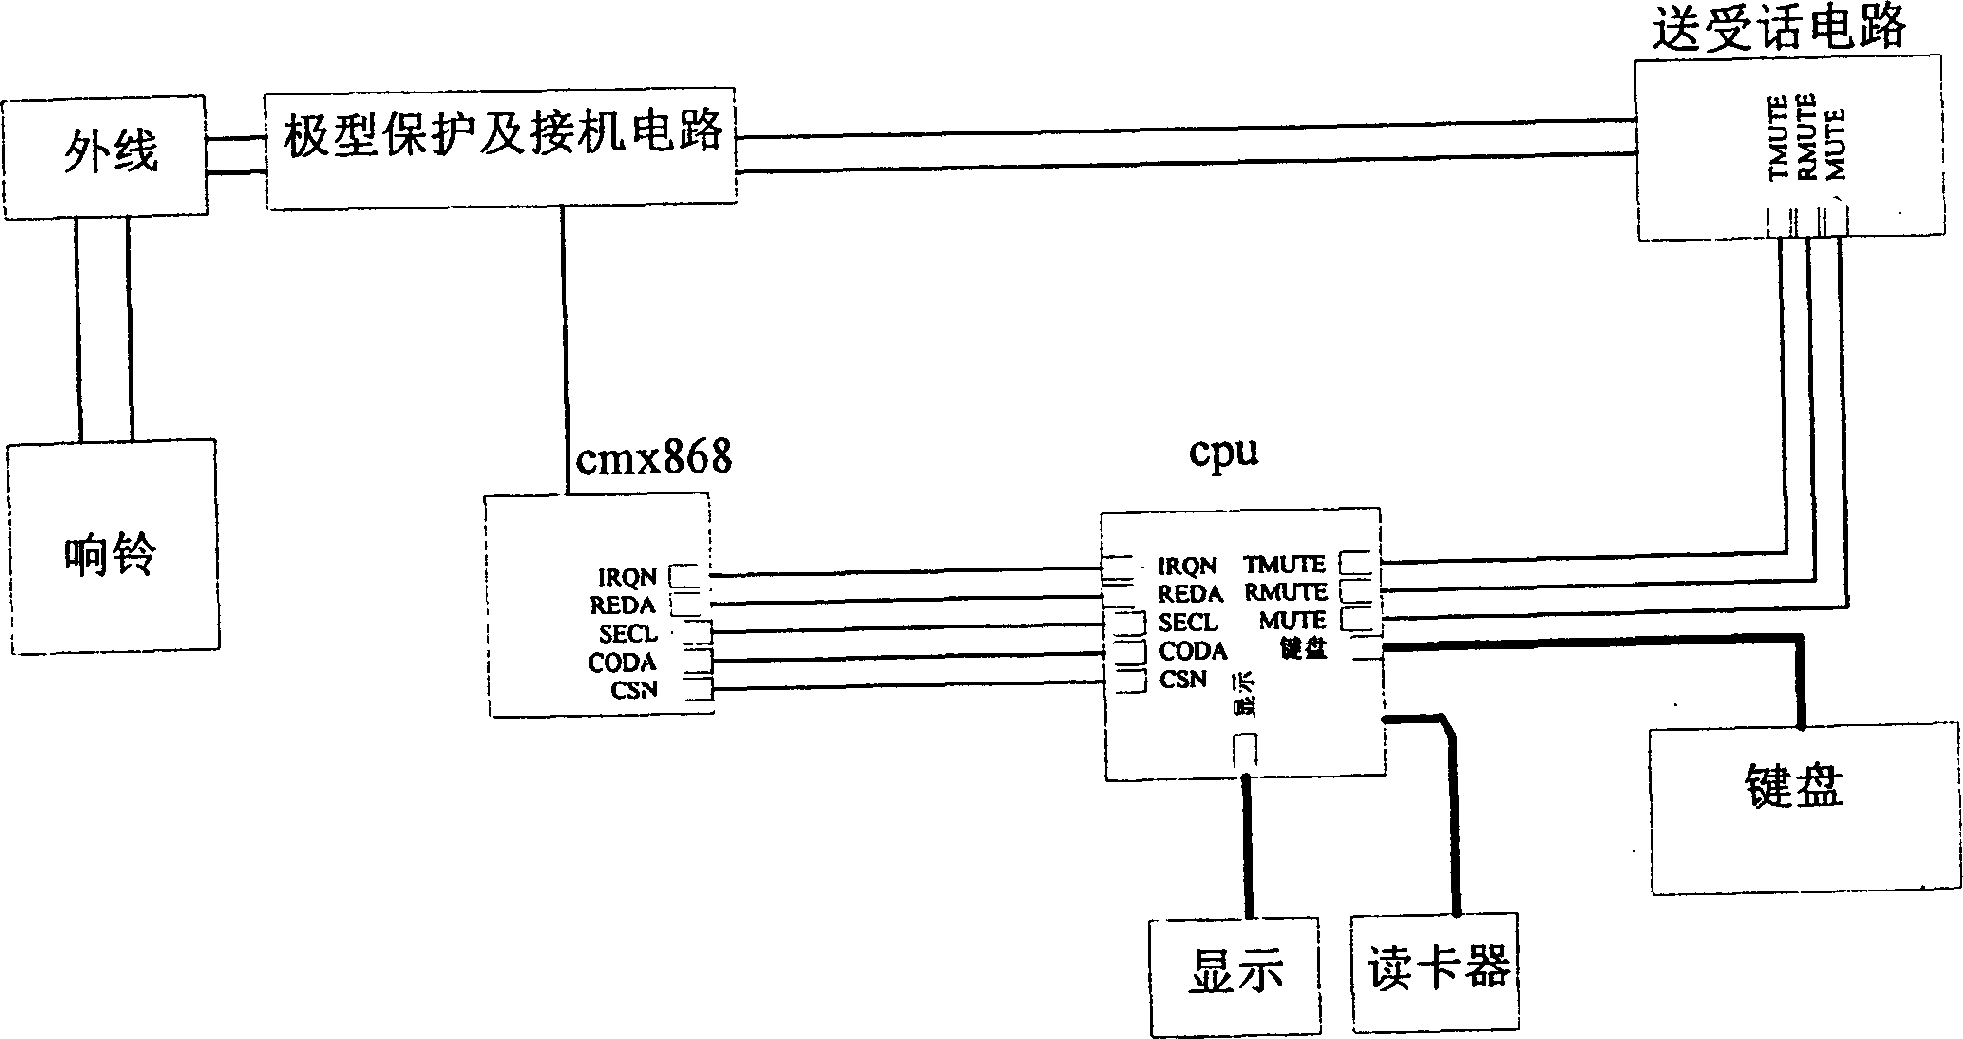 Application of FSk technique in public telephone terminal of intelligent network